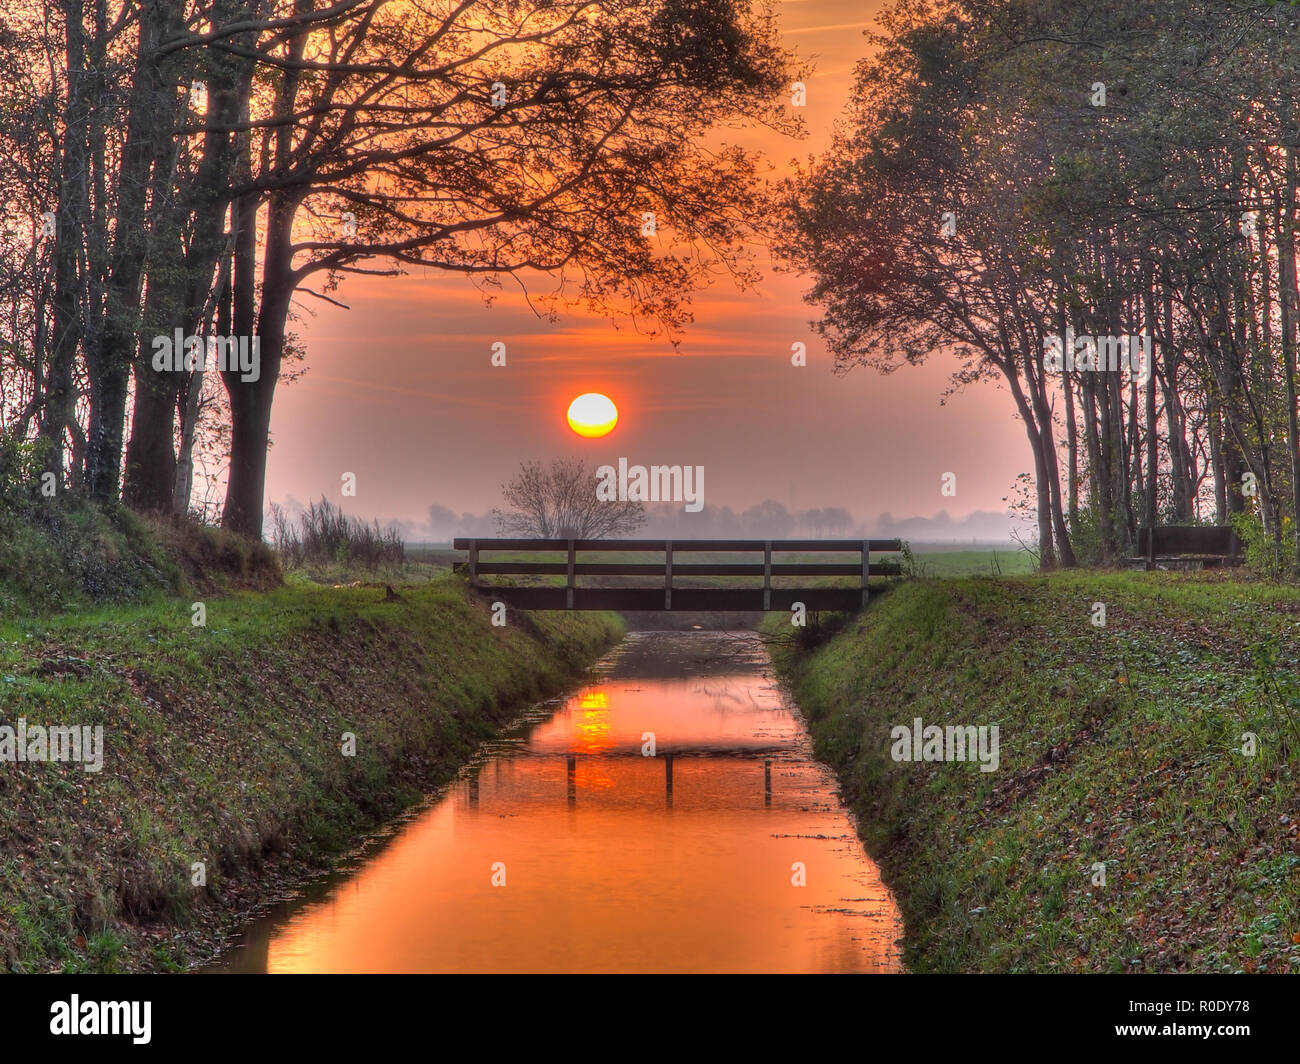 Sunset over bridge and ditch in a park Stock Photo